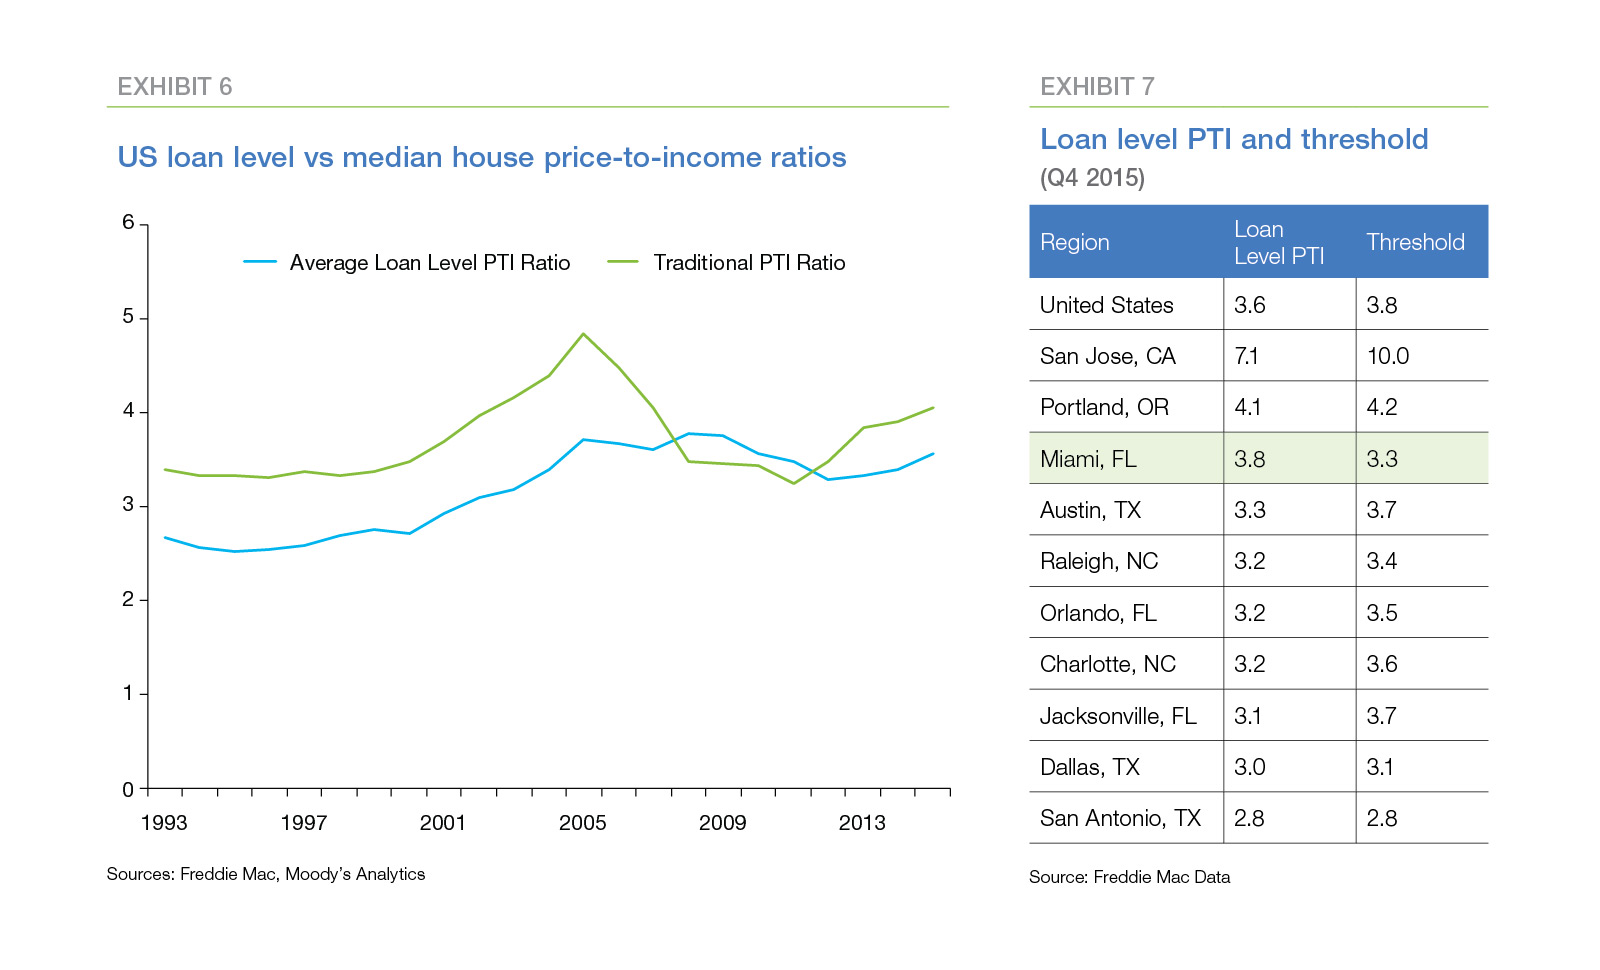 Line graph showing U.S. loan level vs median house price-to-income ratios